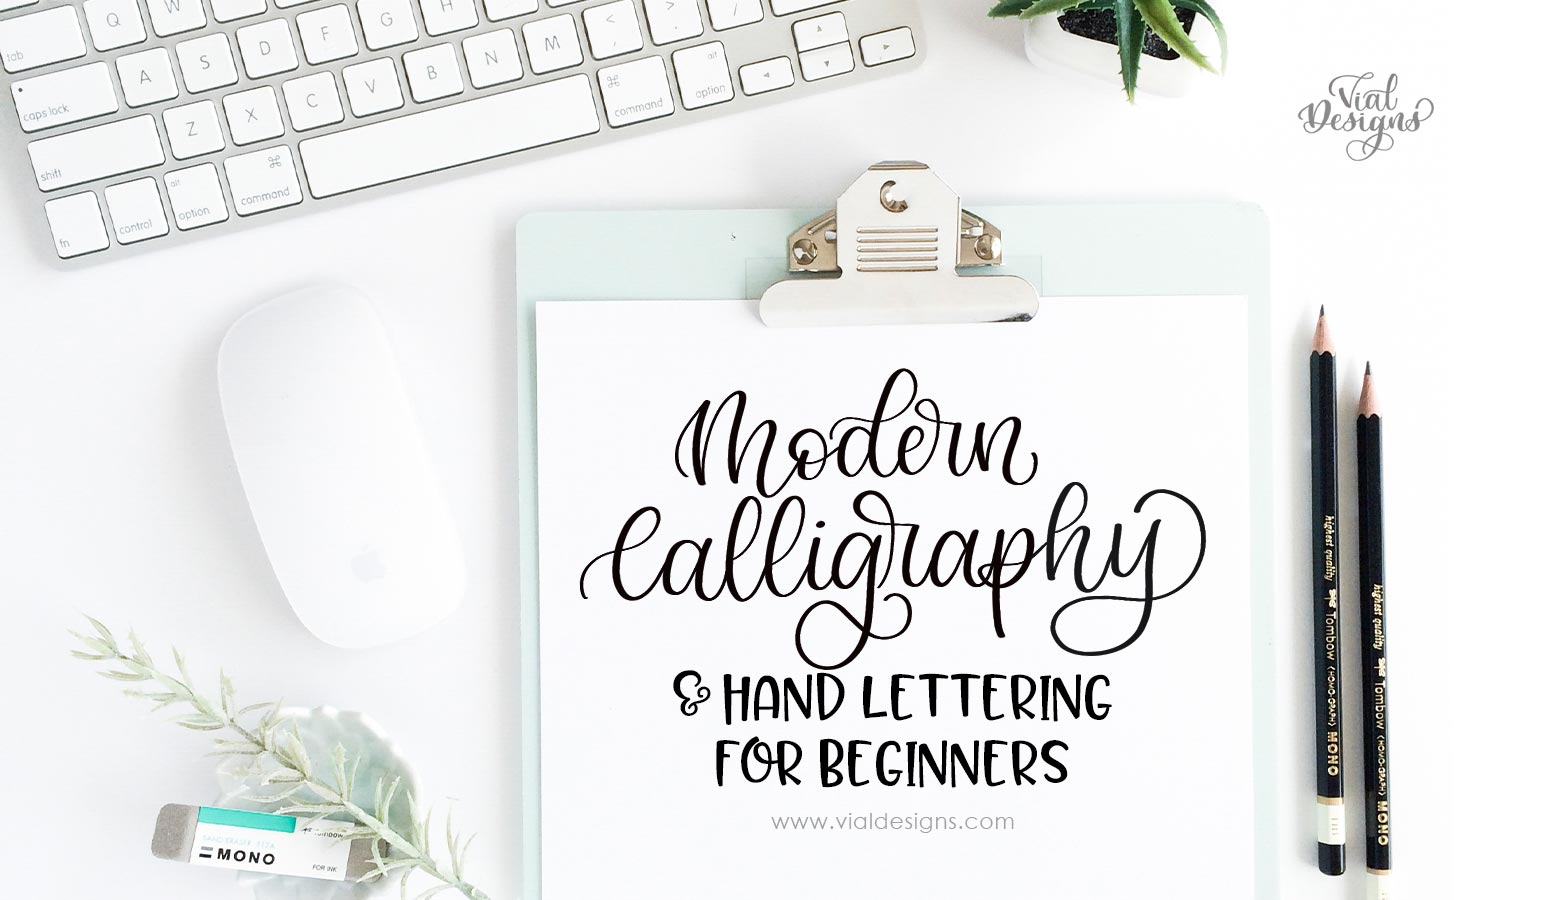 https://www.vialdesigns.com/wp-content/uploads/Modern-Calligraphy-and-Hand-lettering-for-beginners-by-Vial-Designs.jpg